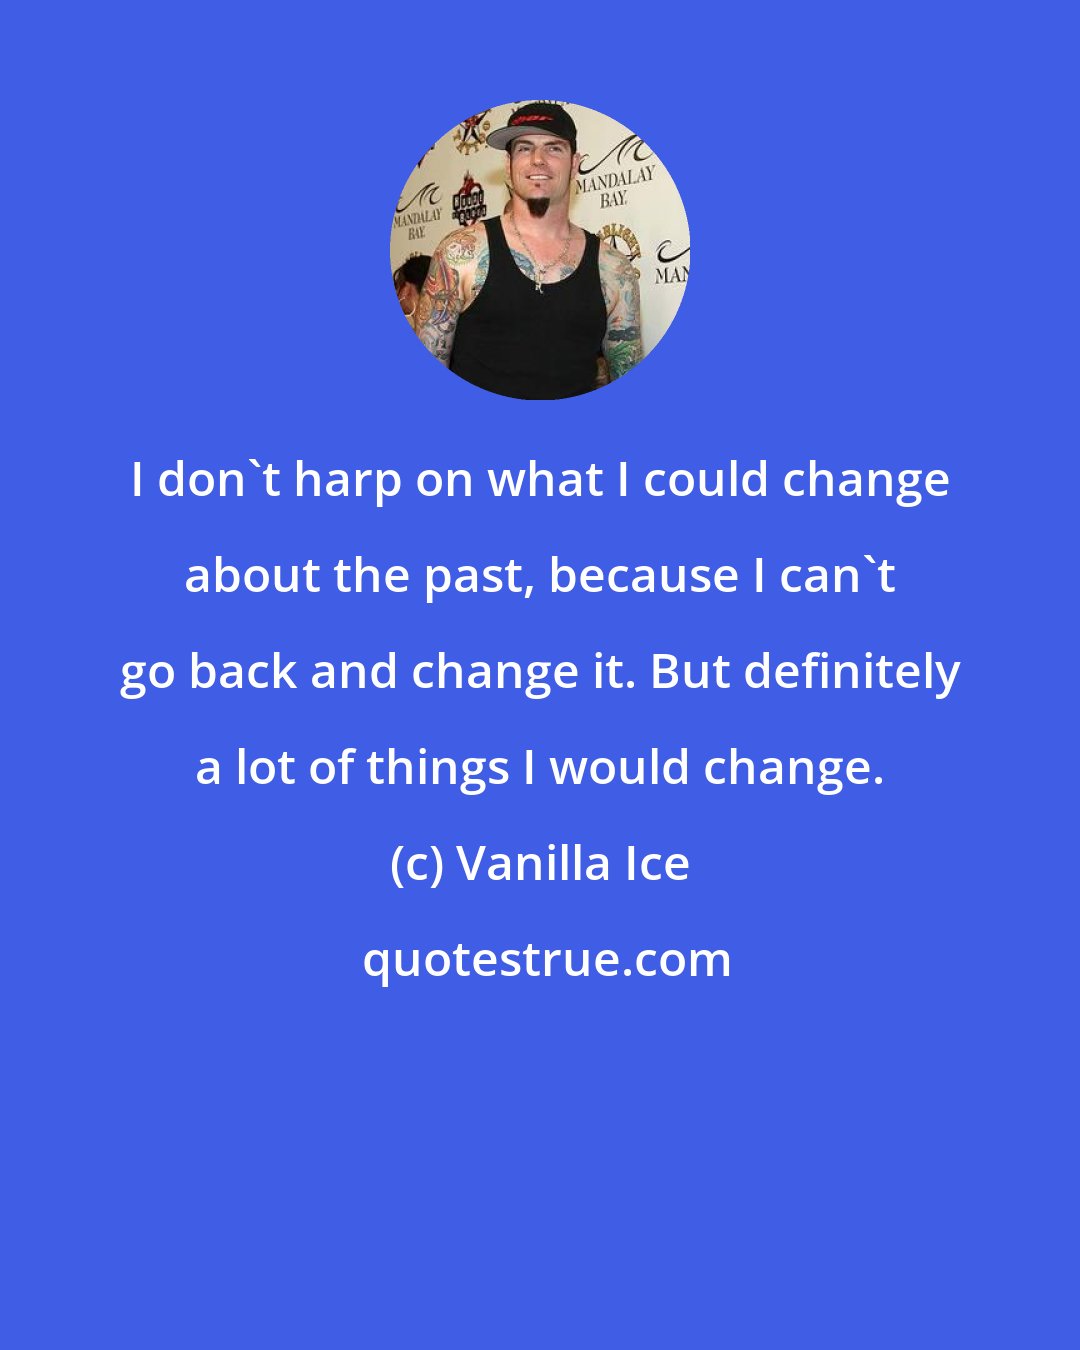 Vanilla Ice: I don't harp on what I could change about the past, because I can't go back and change it. But definitely a lot of things I would change.